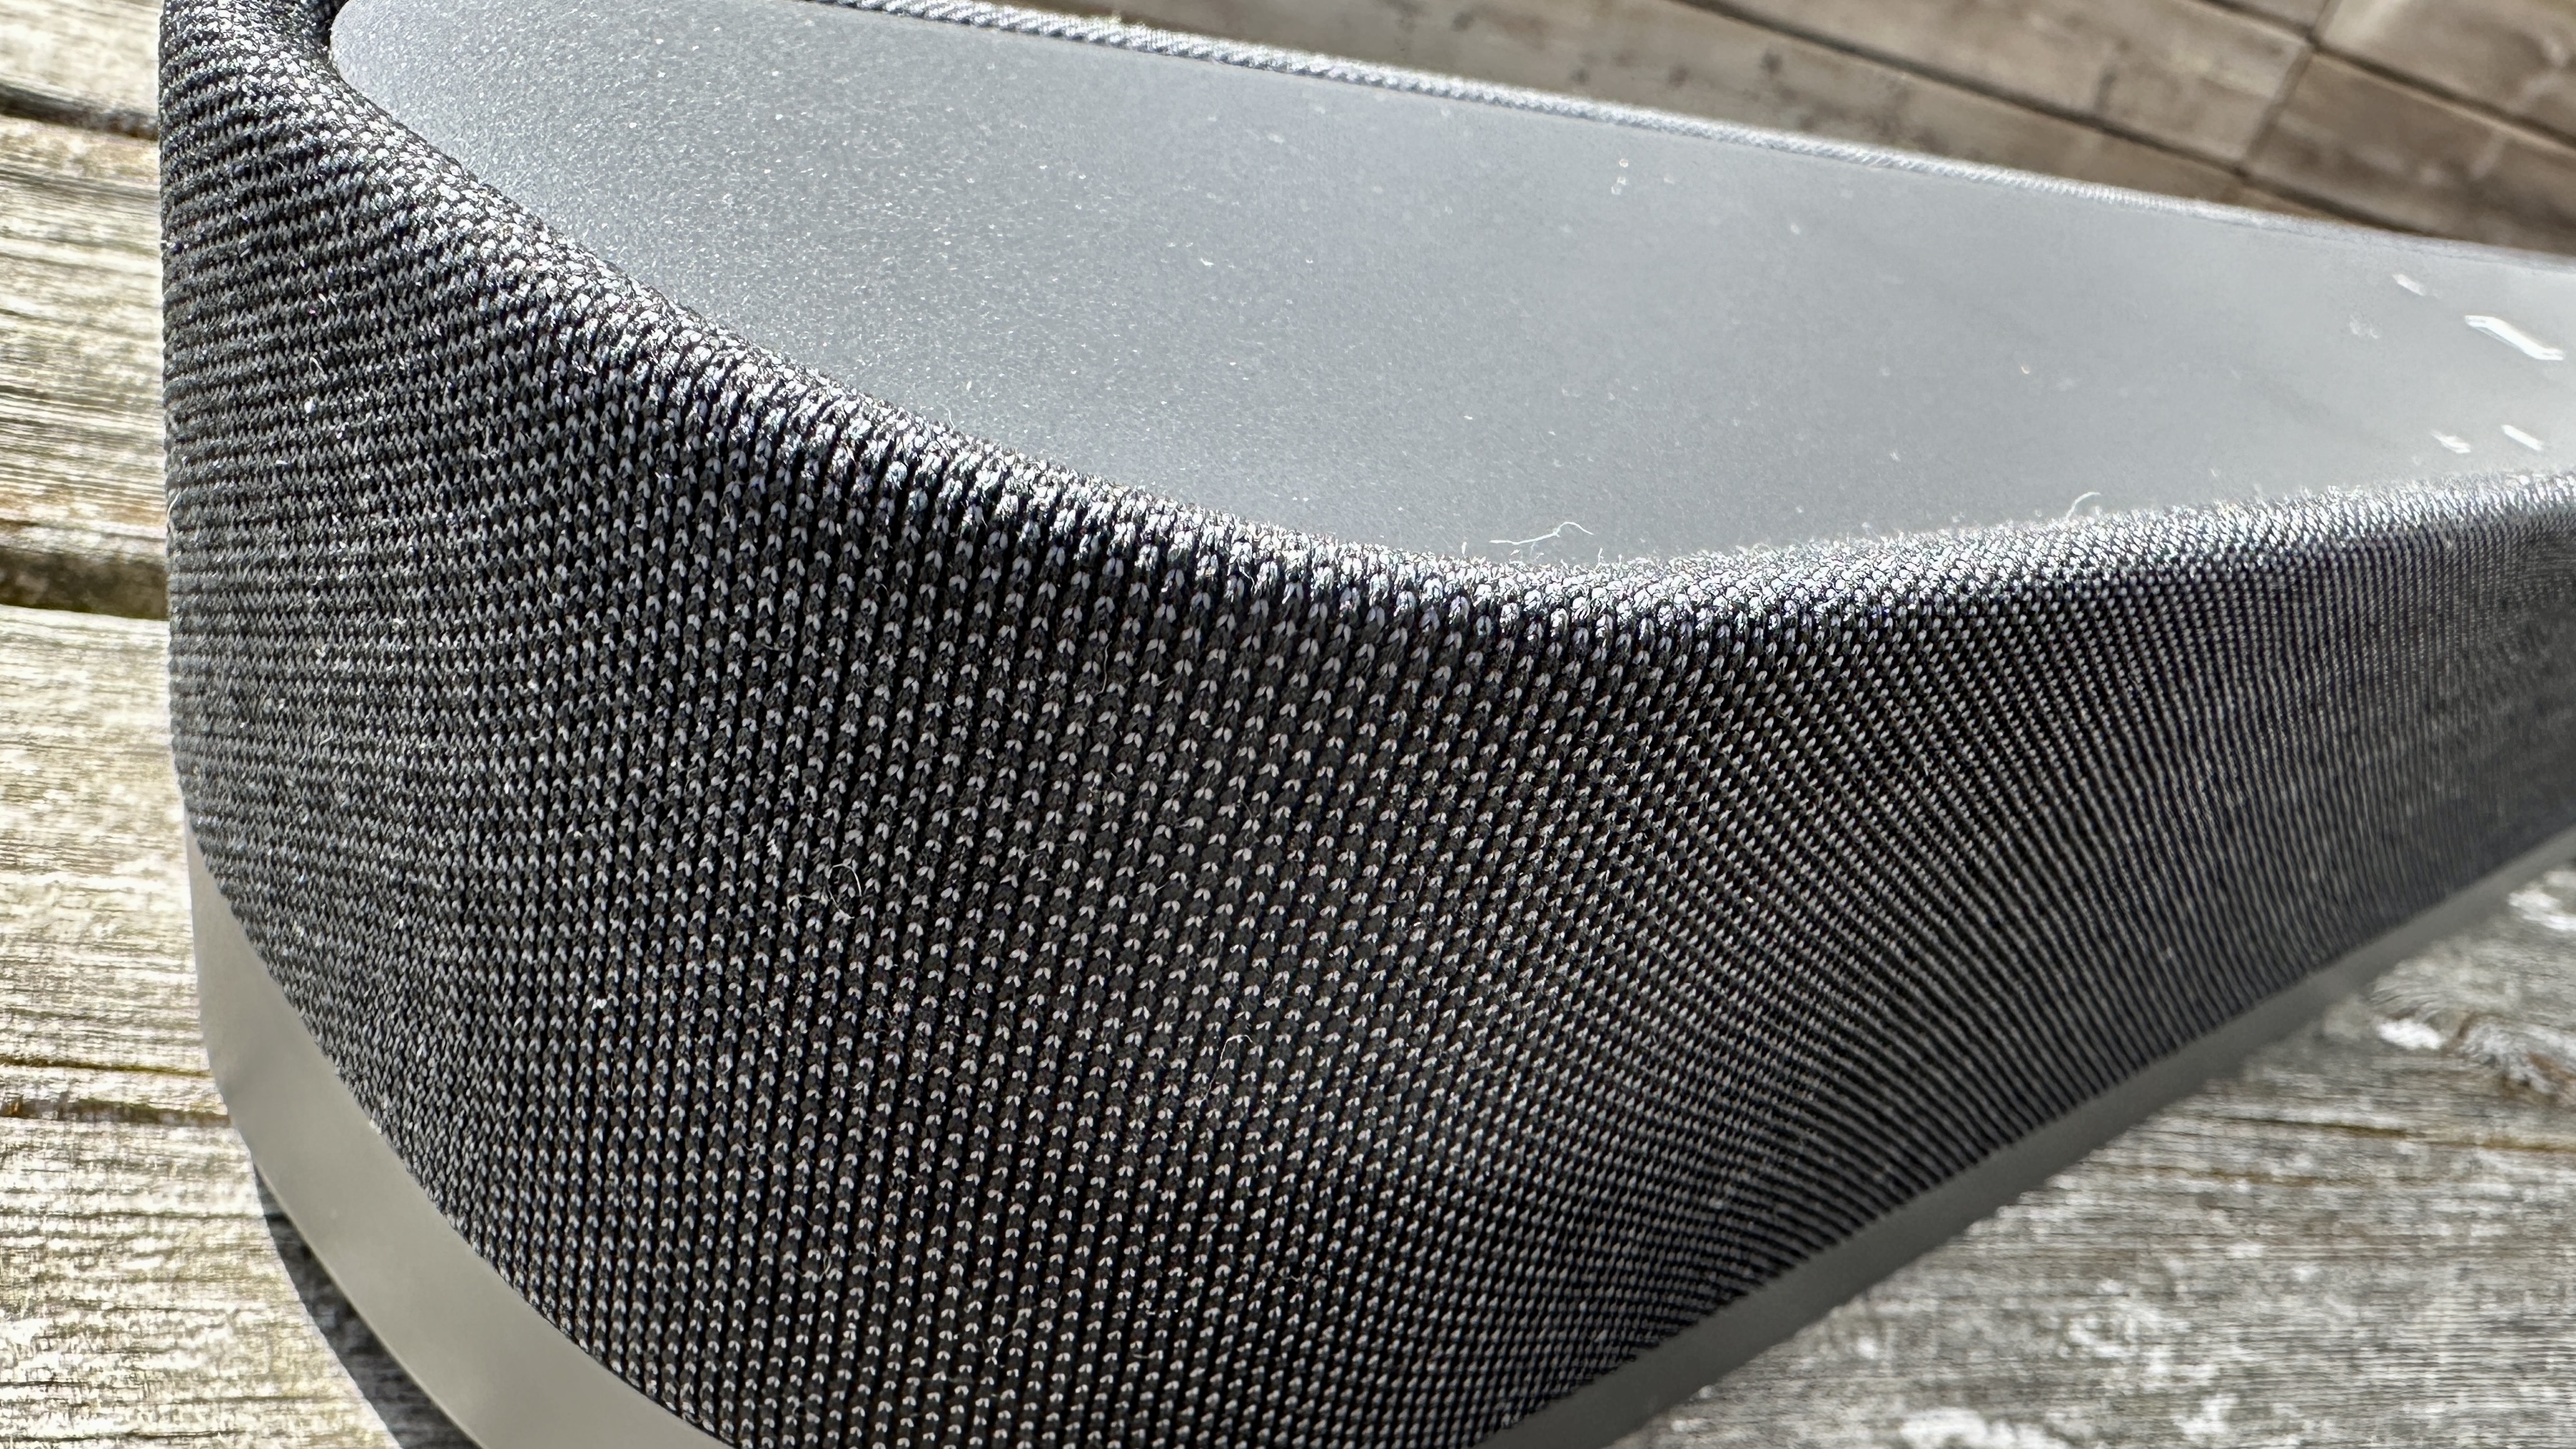 Sennheiser Ambeo Mini speaker grille close-up at the ends